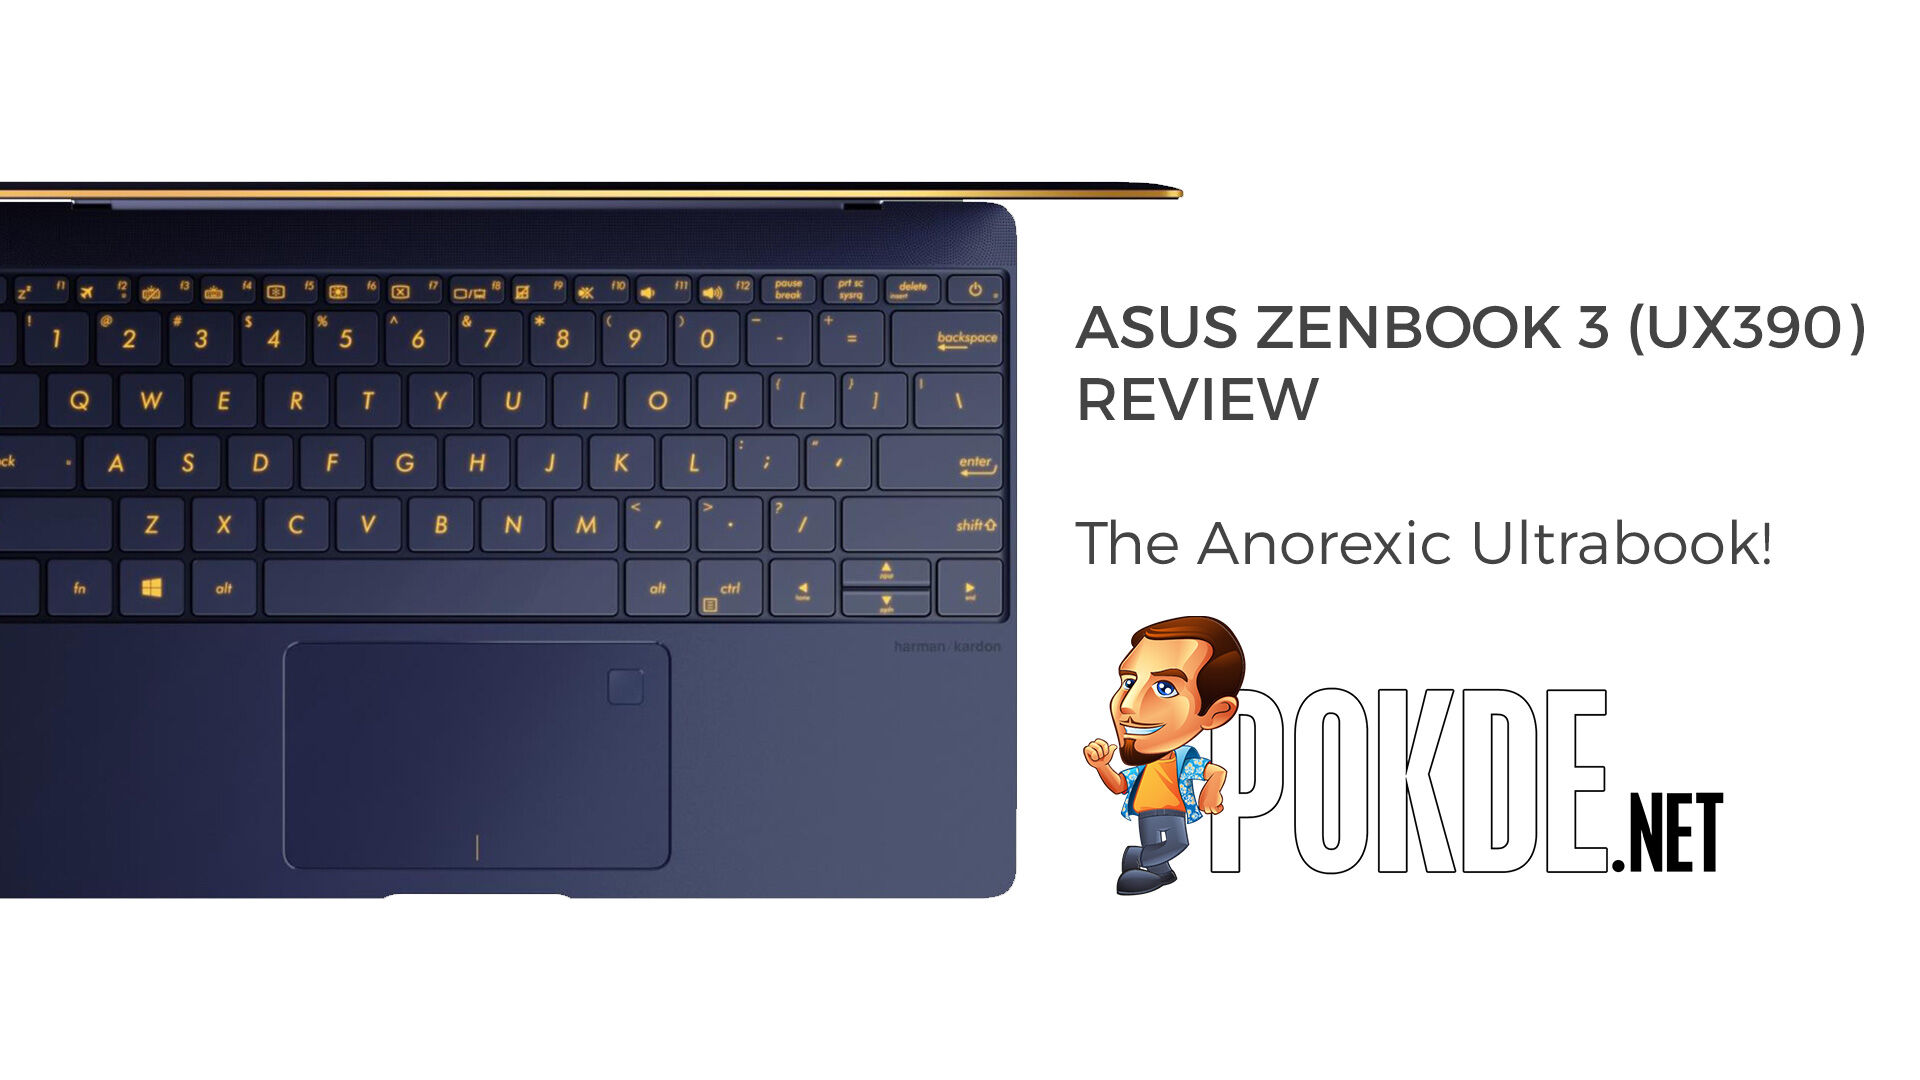 Asus ZenBook 3 (UX390) Review - The Anorexic Ultrabook 36